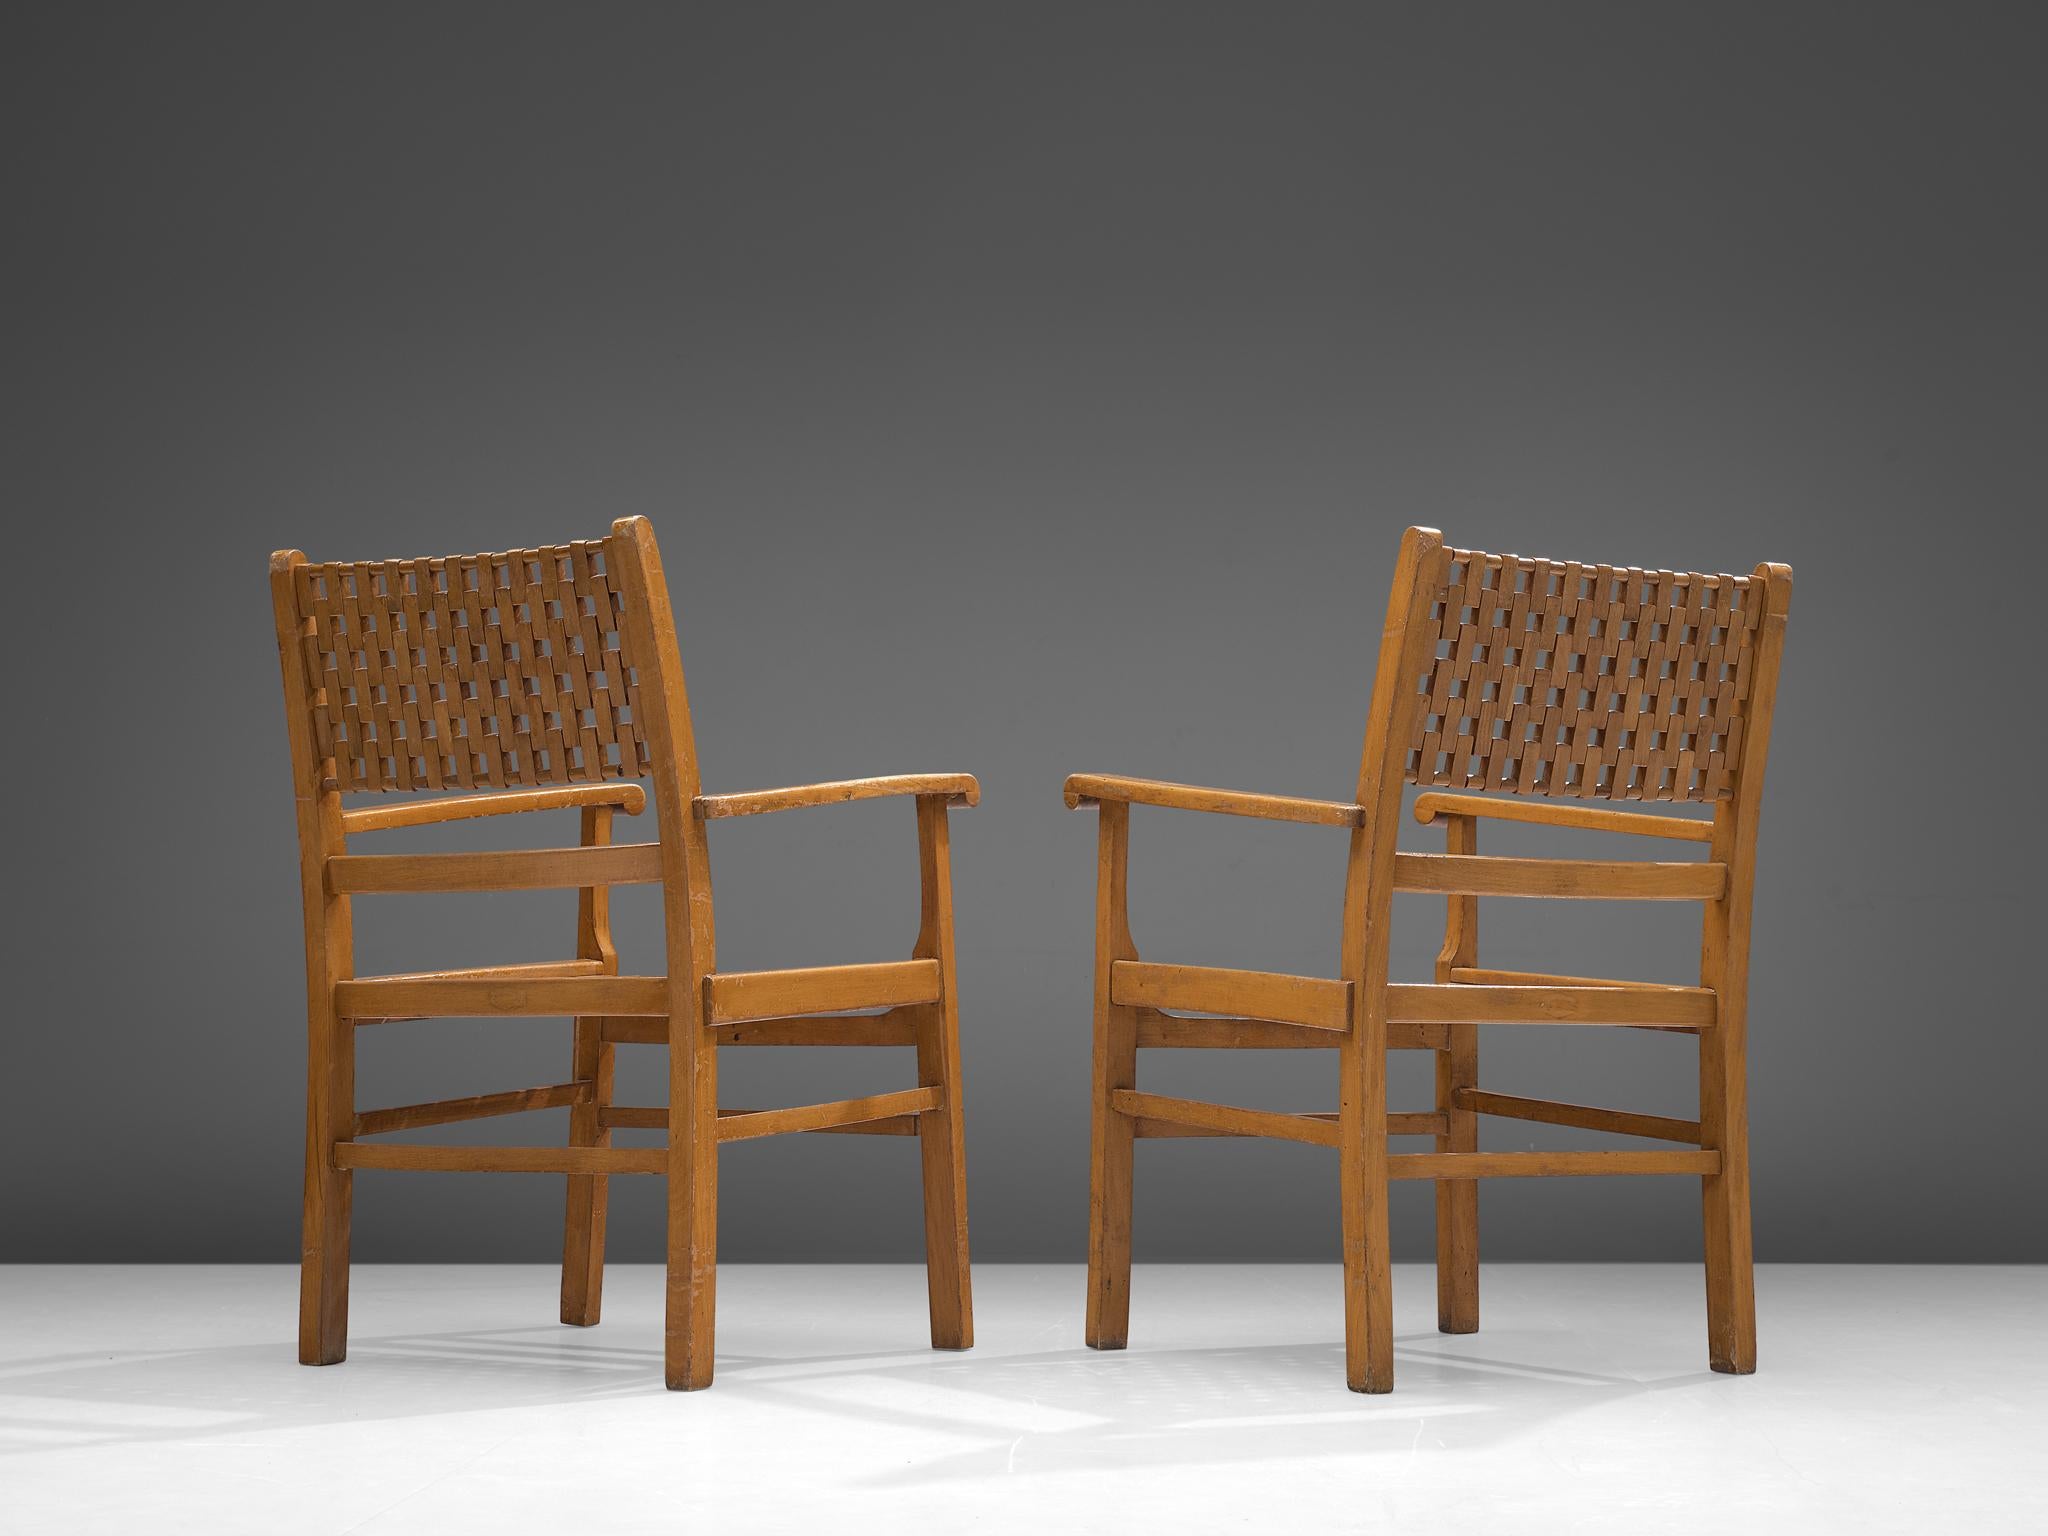 Czech German Armchairs with Webbed Seats, 1930s